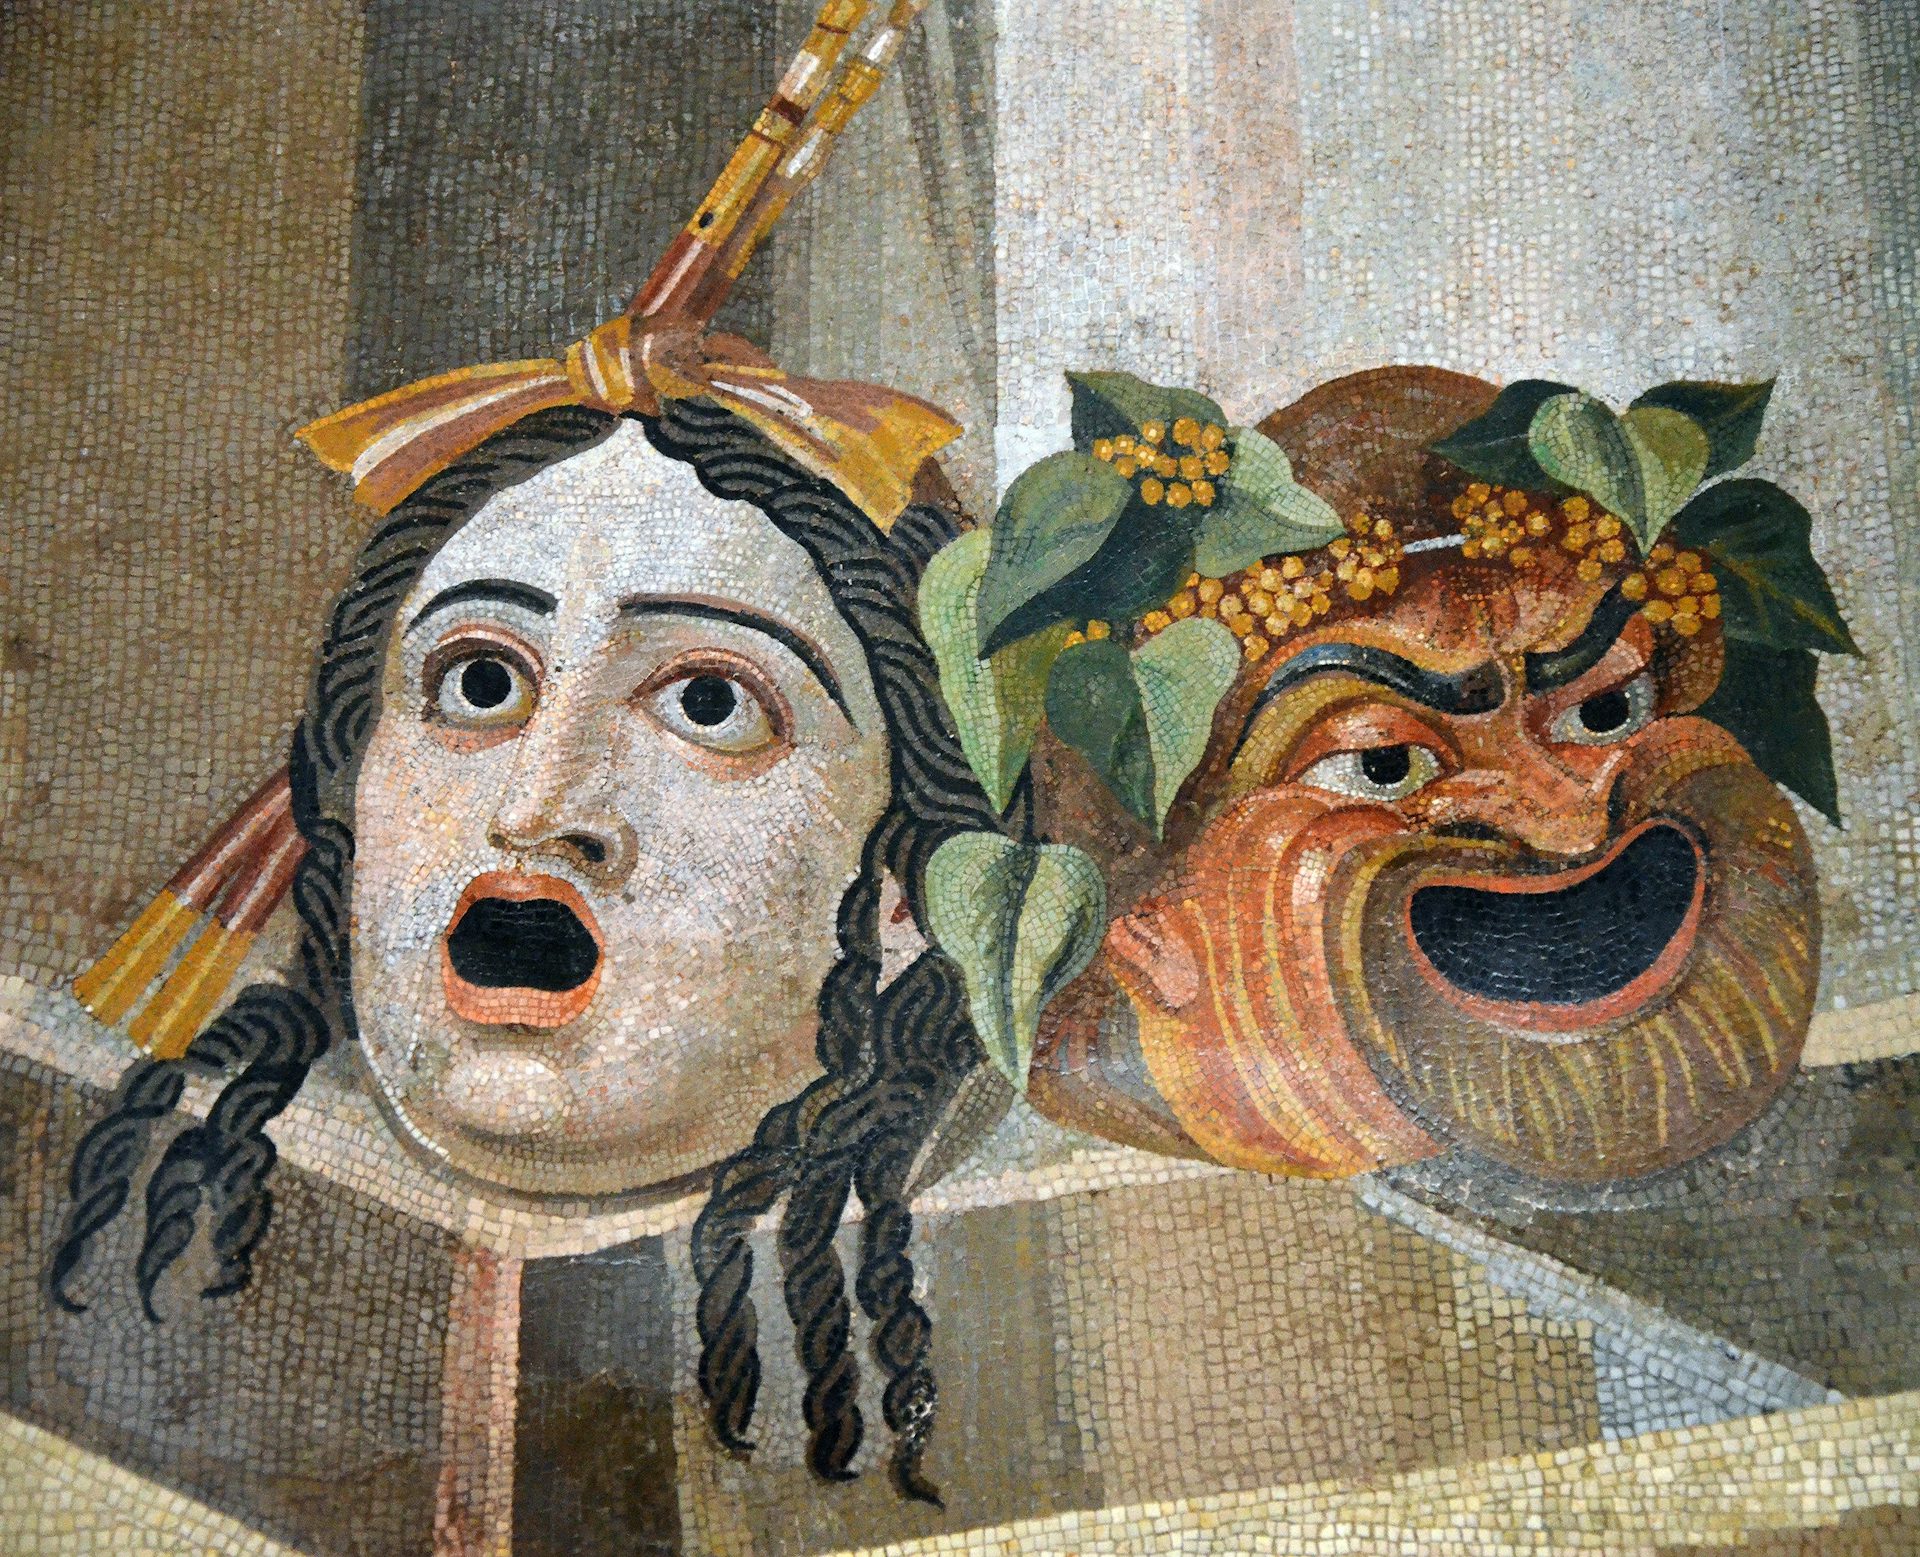 Roman mosaic of the theatrical masks of tragedy and comedy